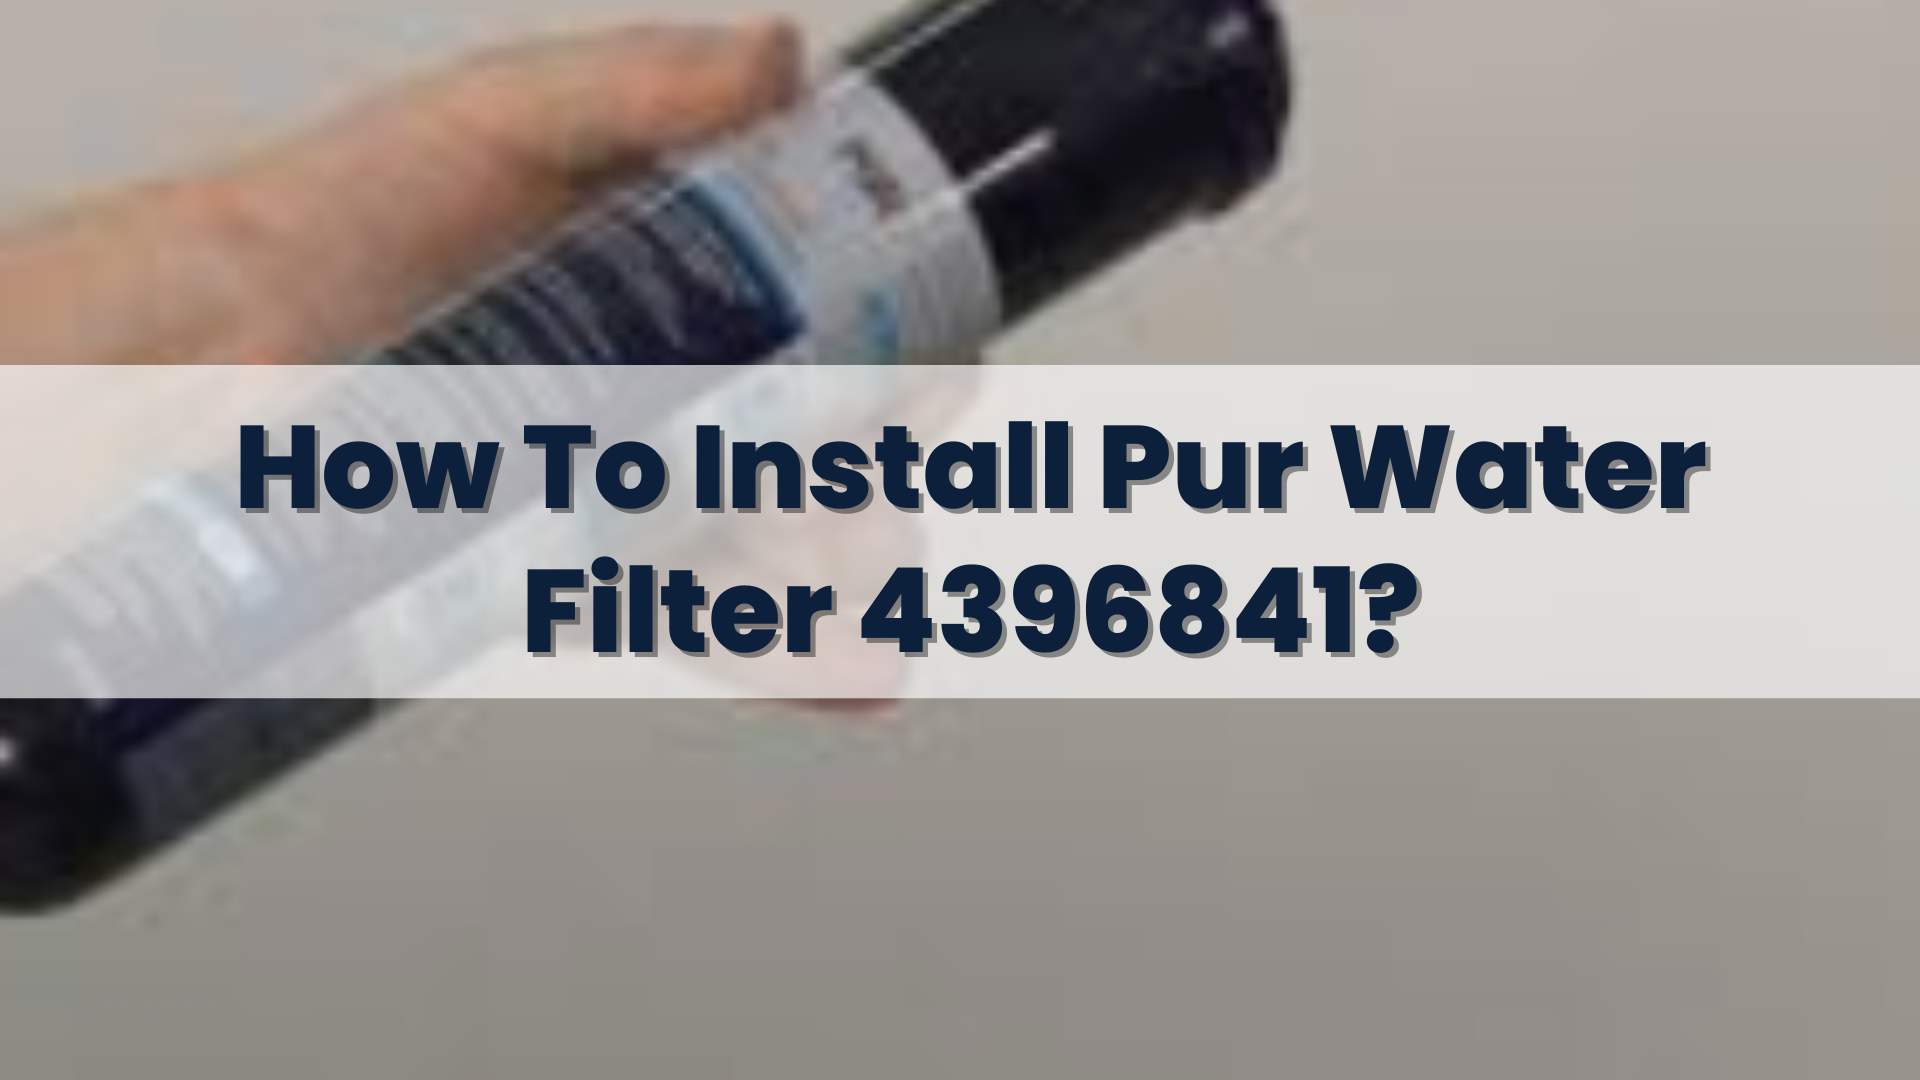 How To Install Pur Water Filter 4396841